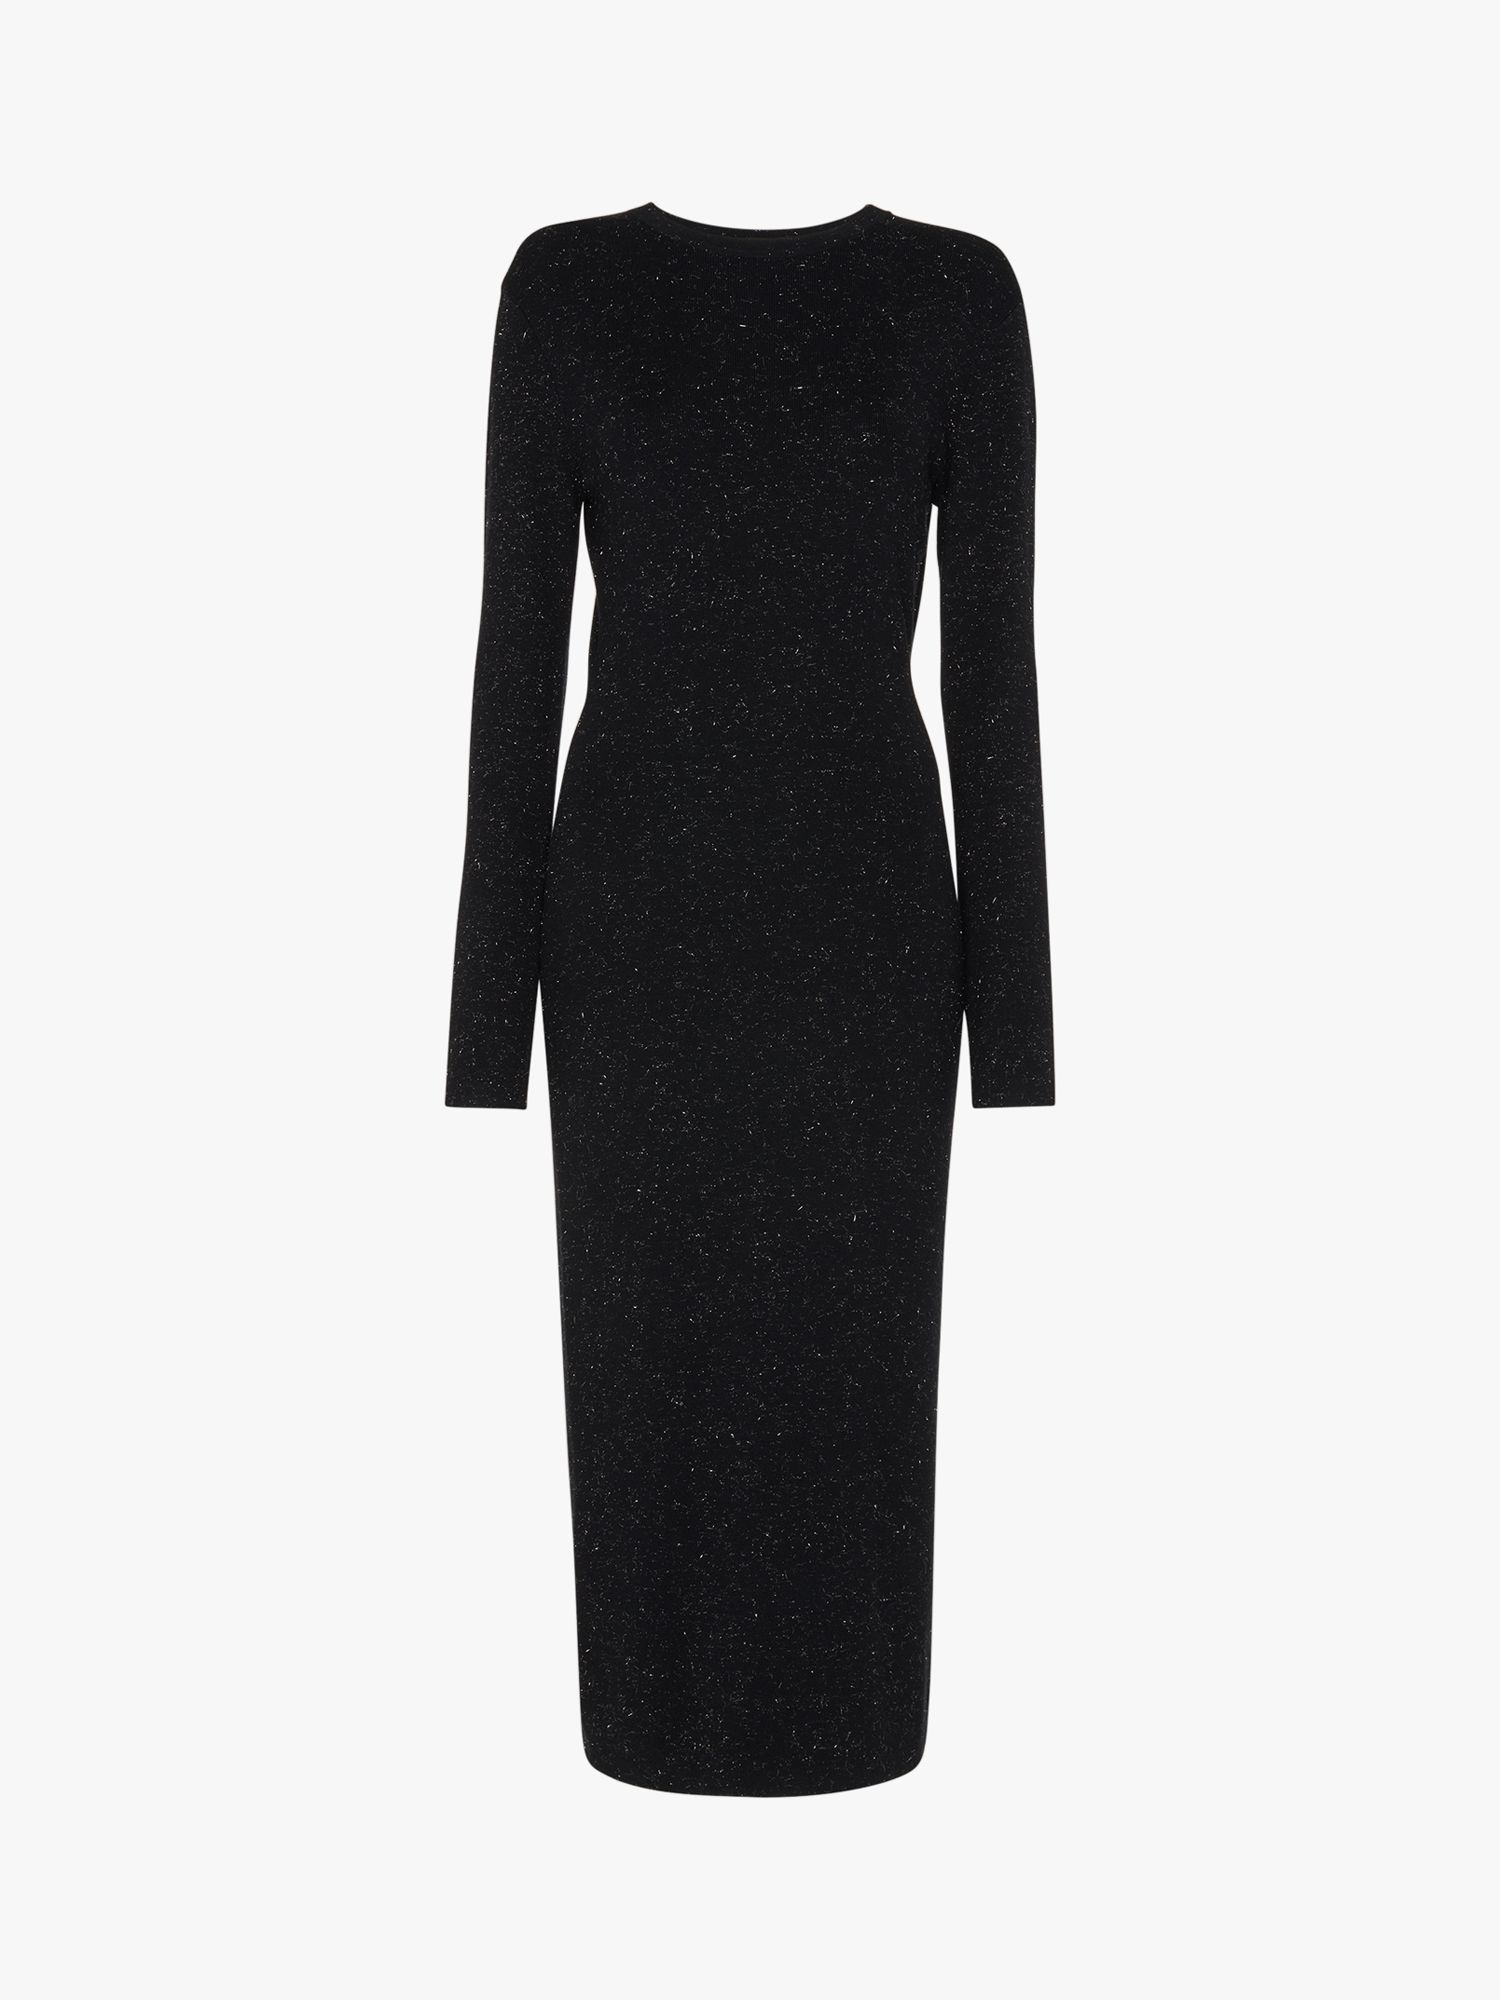 Whistles Annie Sparkle Knitted Dress, Black at John Lewis & Partners